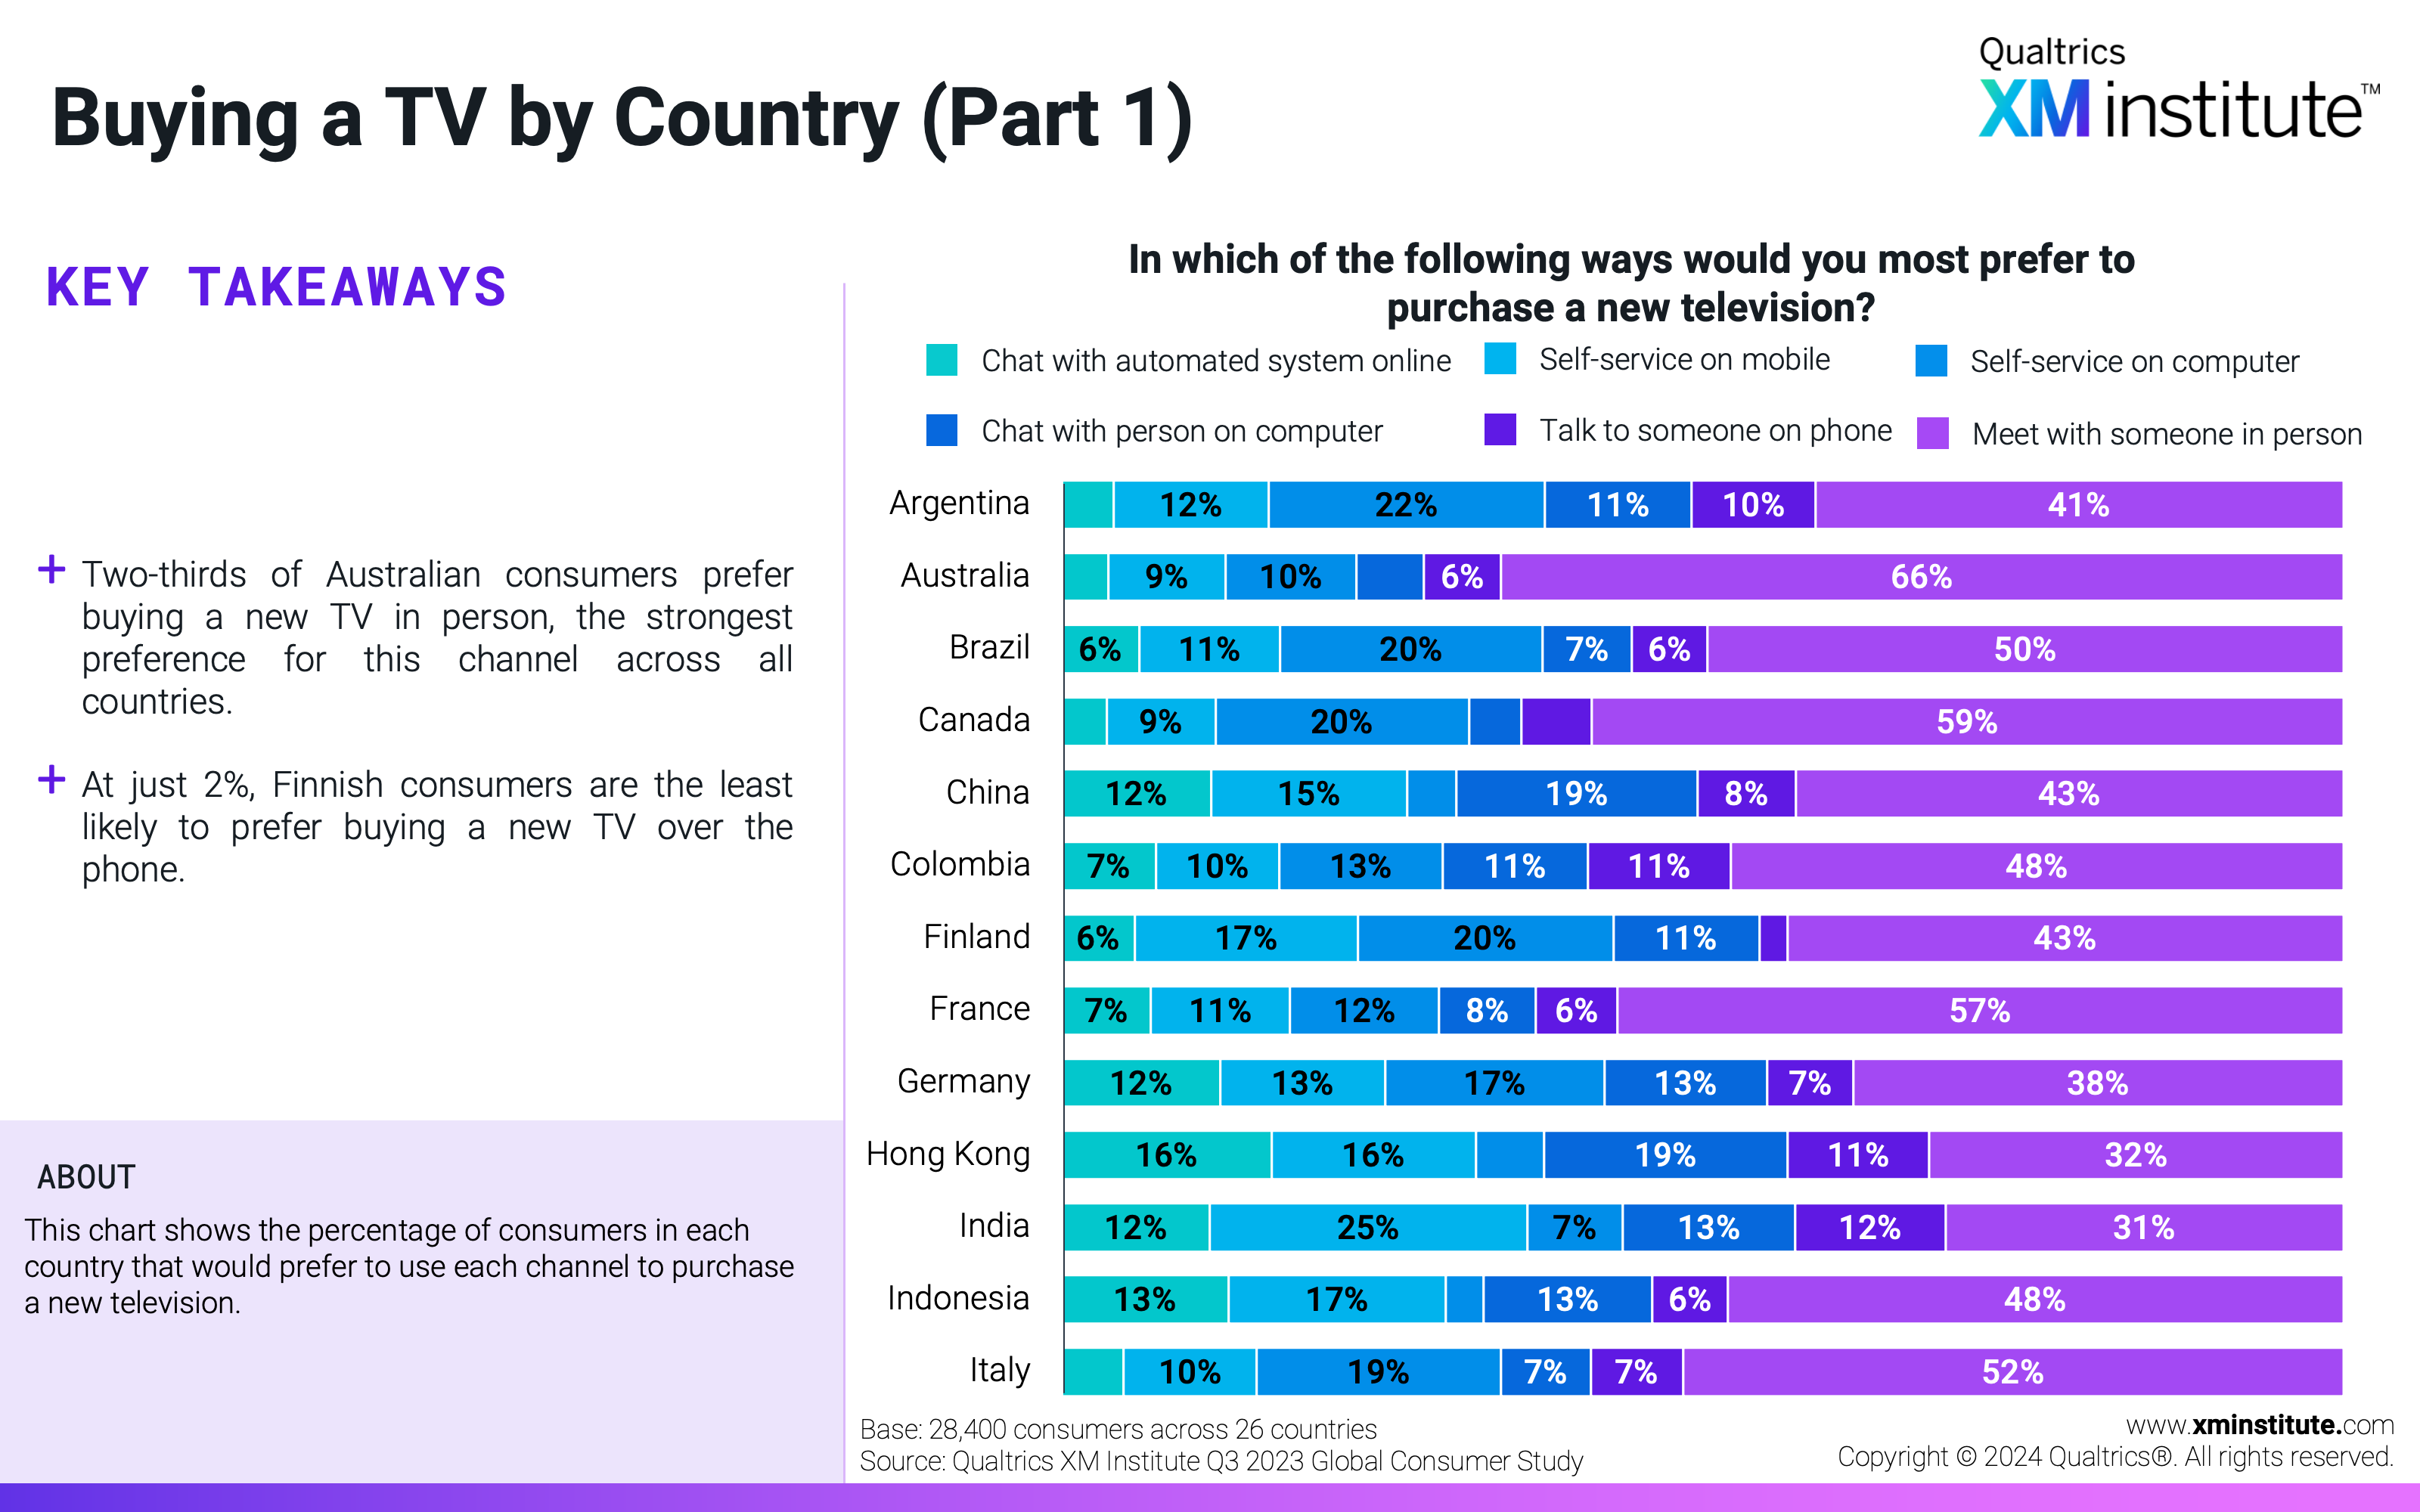 This chart shows the percentage of consumers in each country that would prefer to use each channel to purchase a new television. 